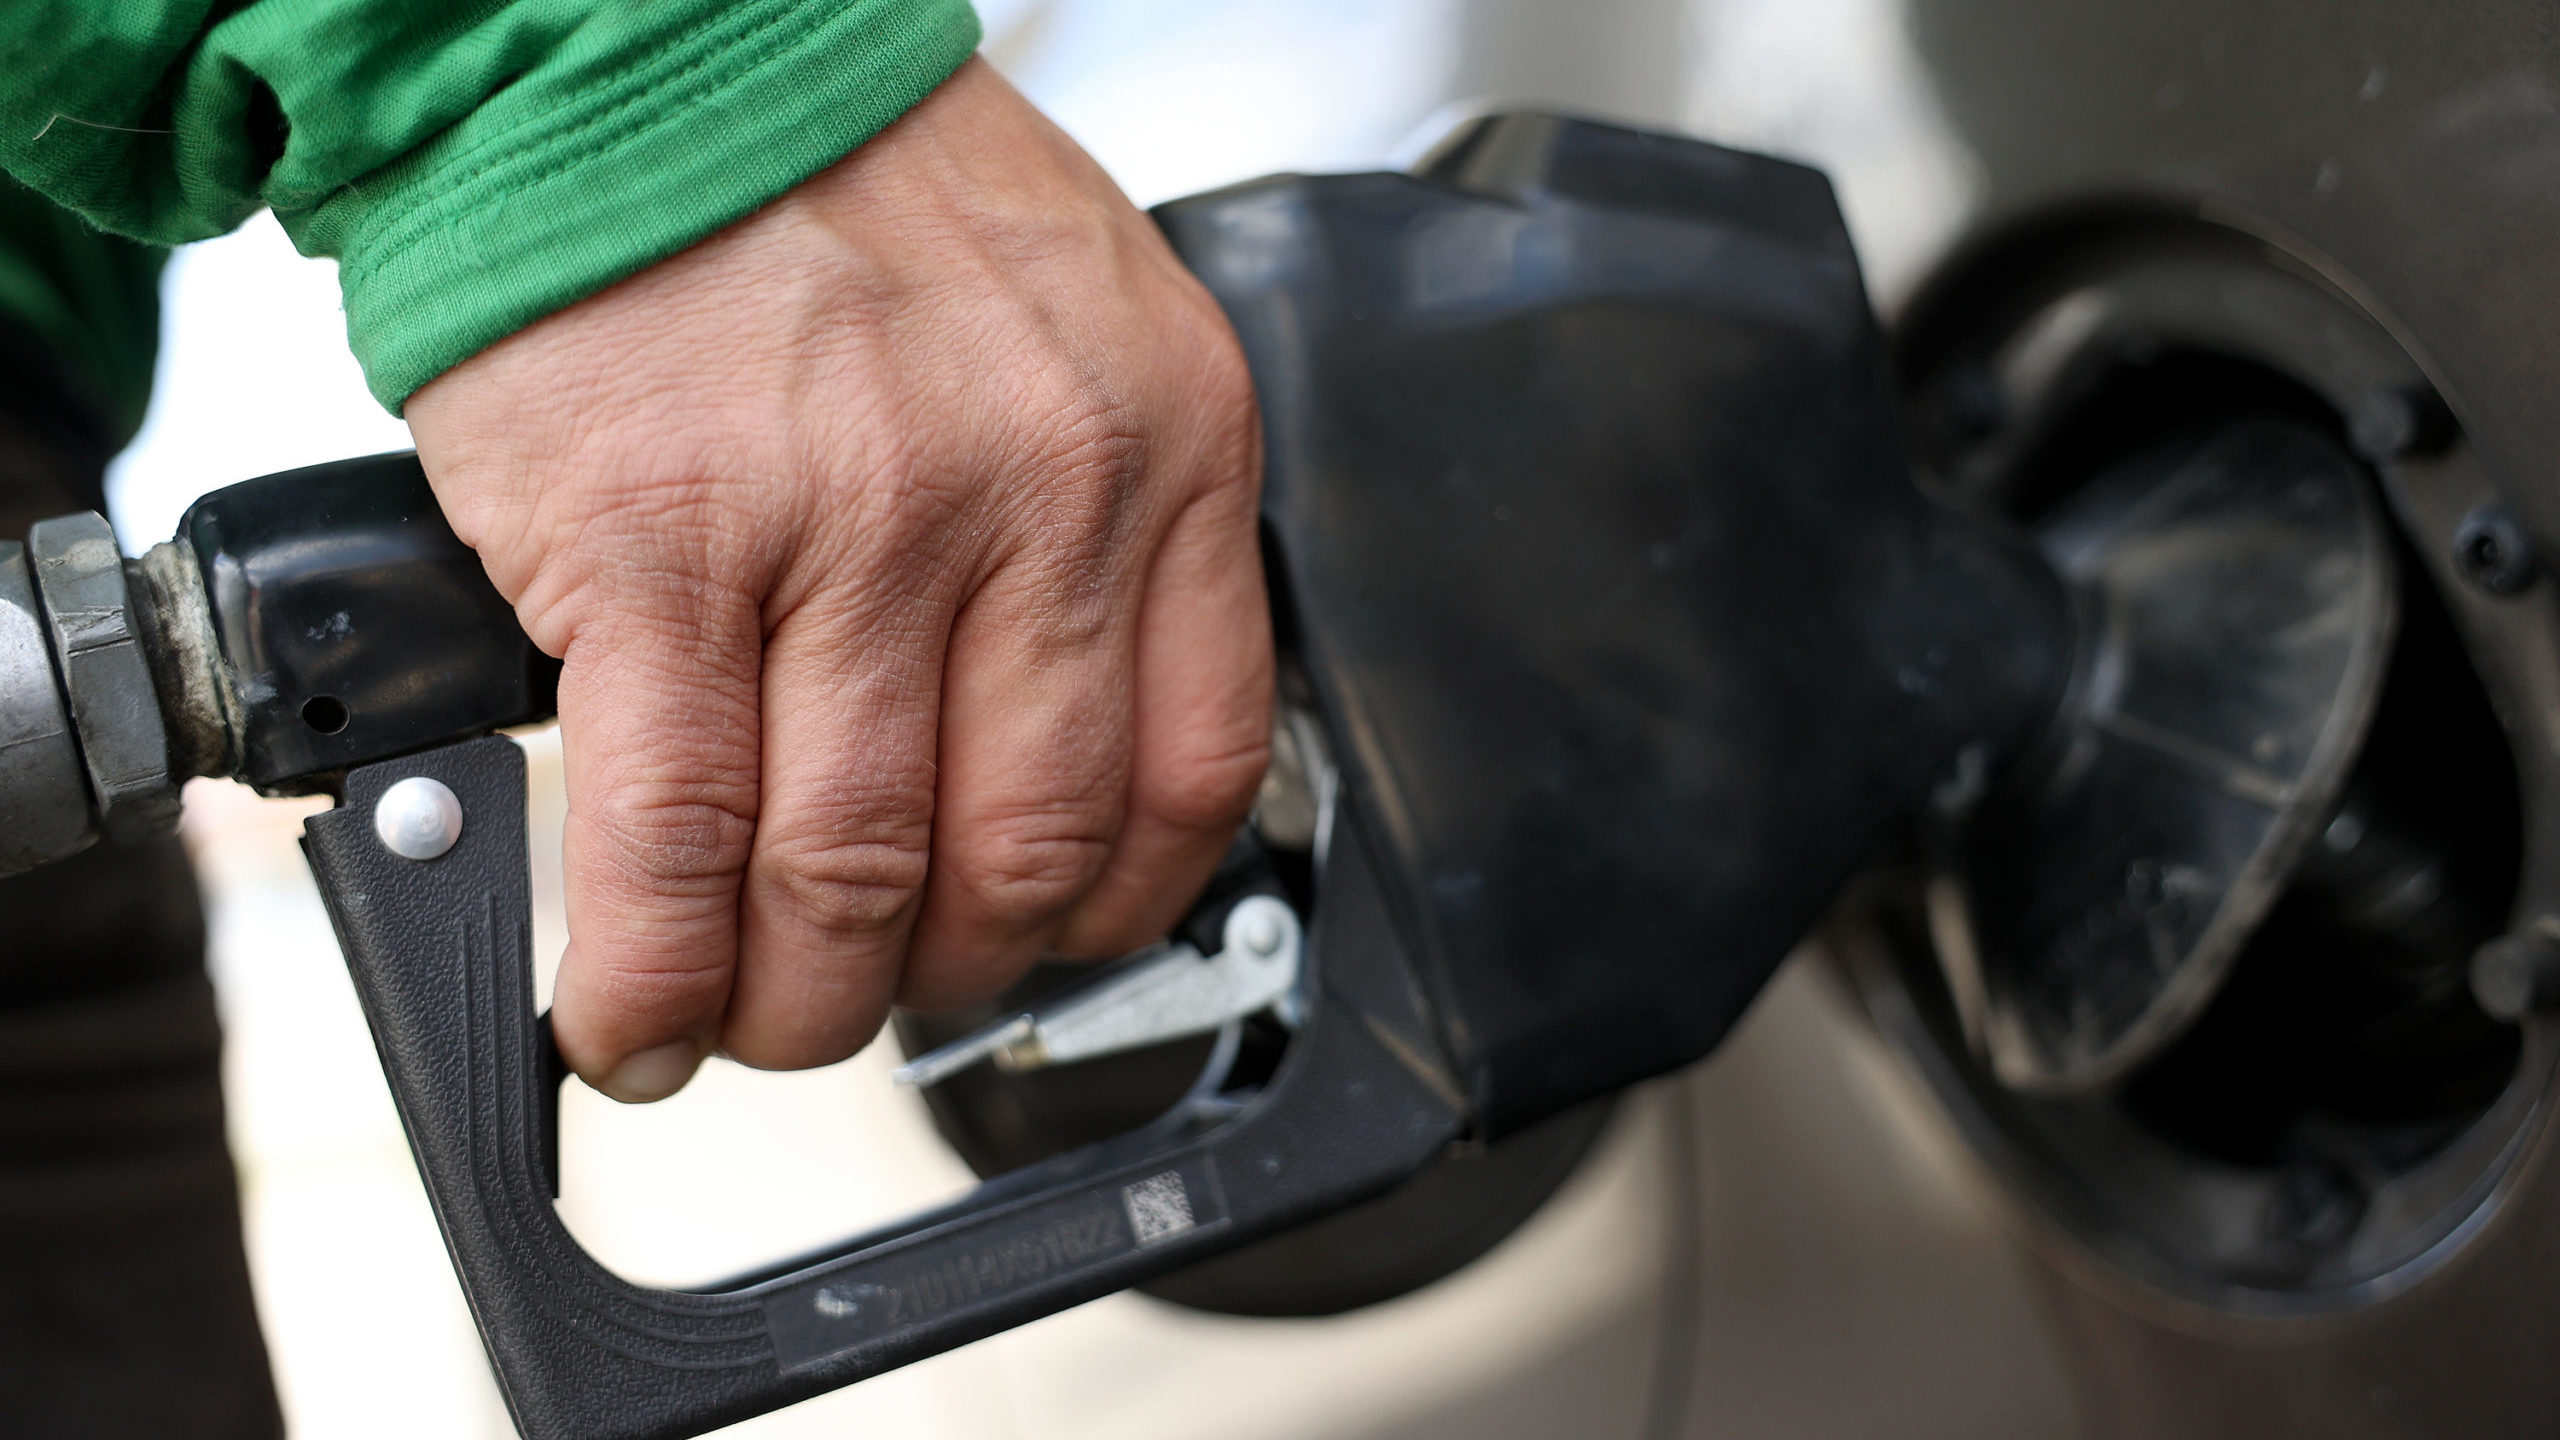 Data shows significant uptick in gas prices over past month in Salt Lake area [Video]